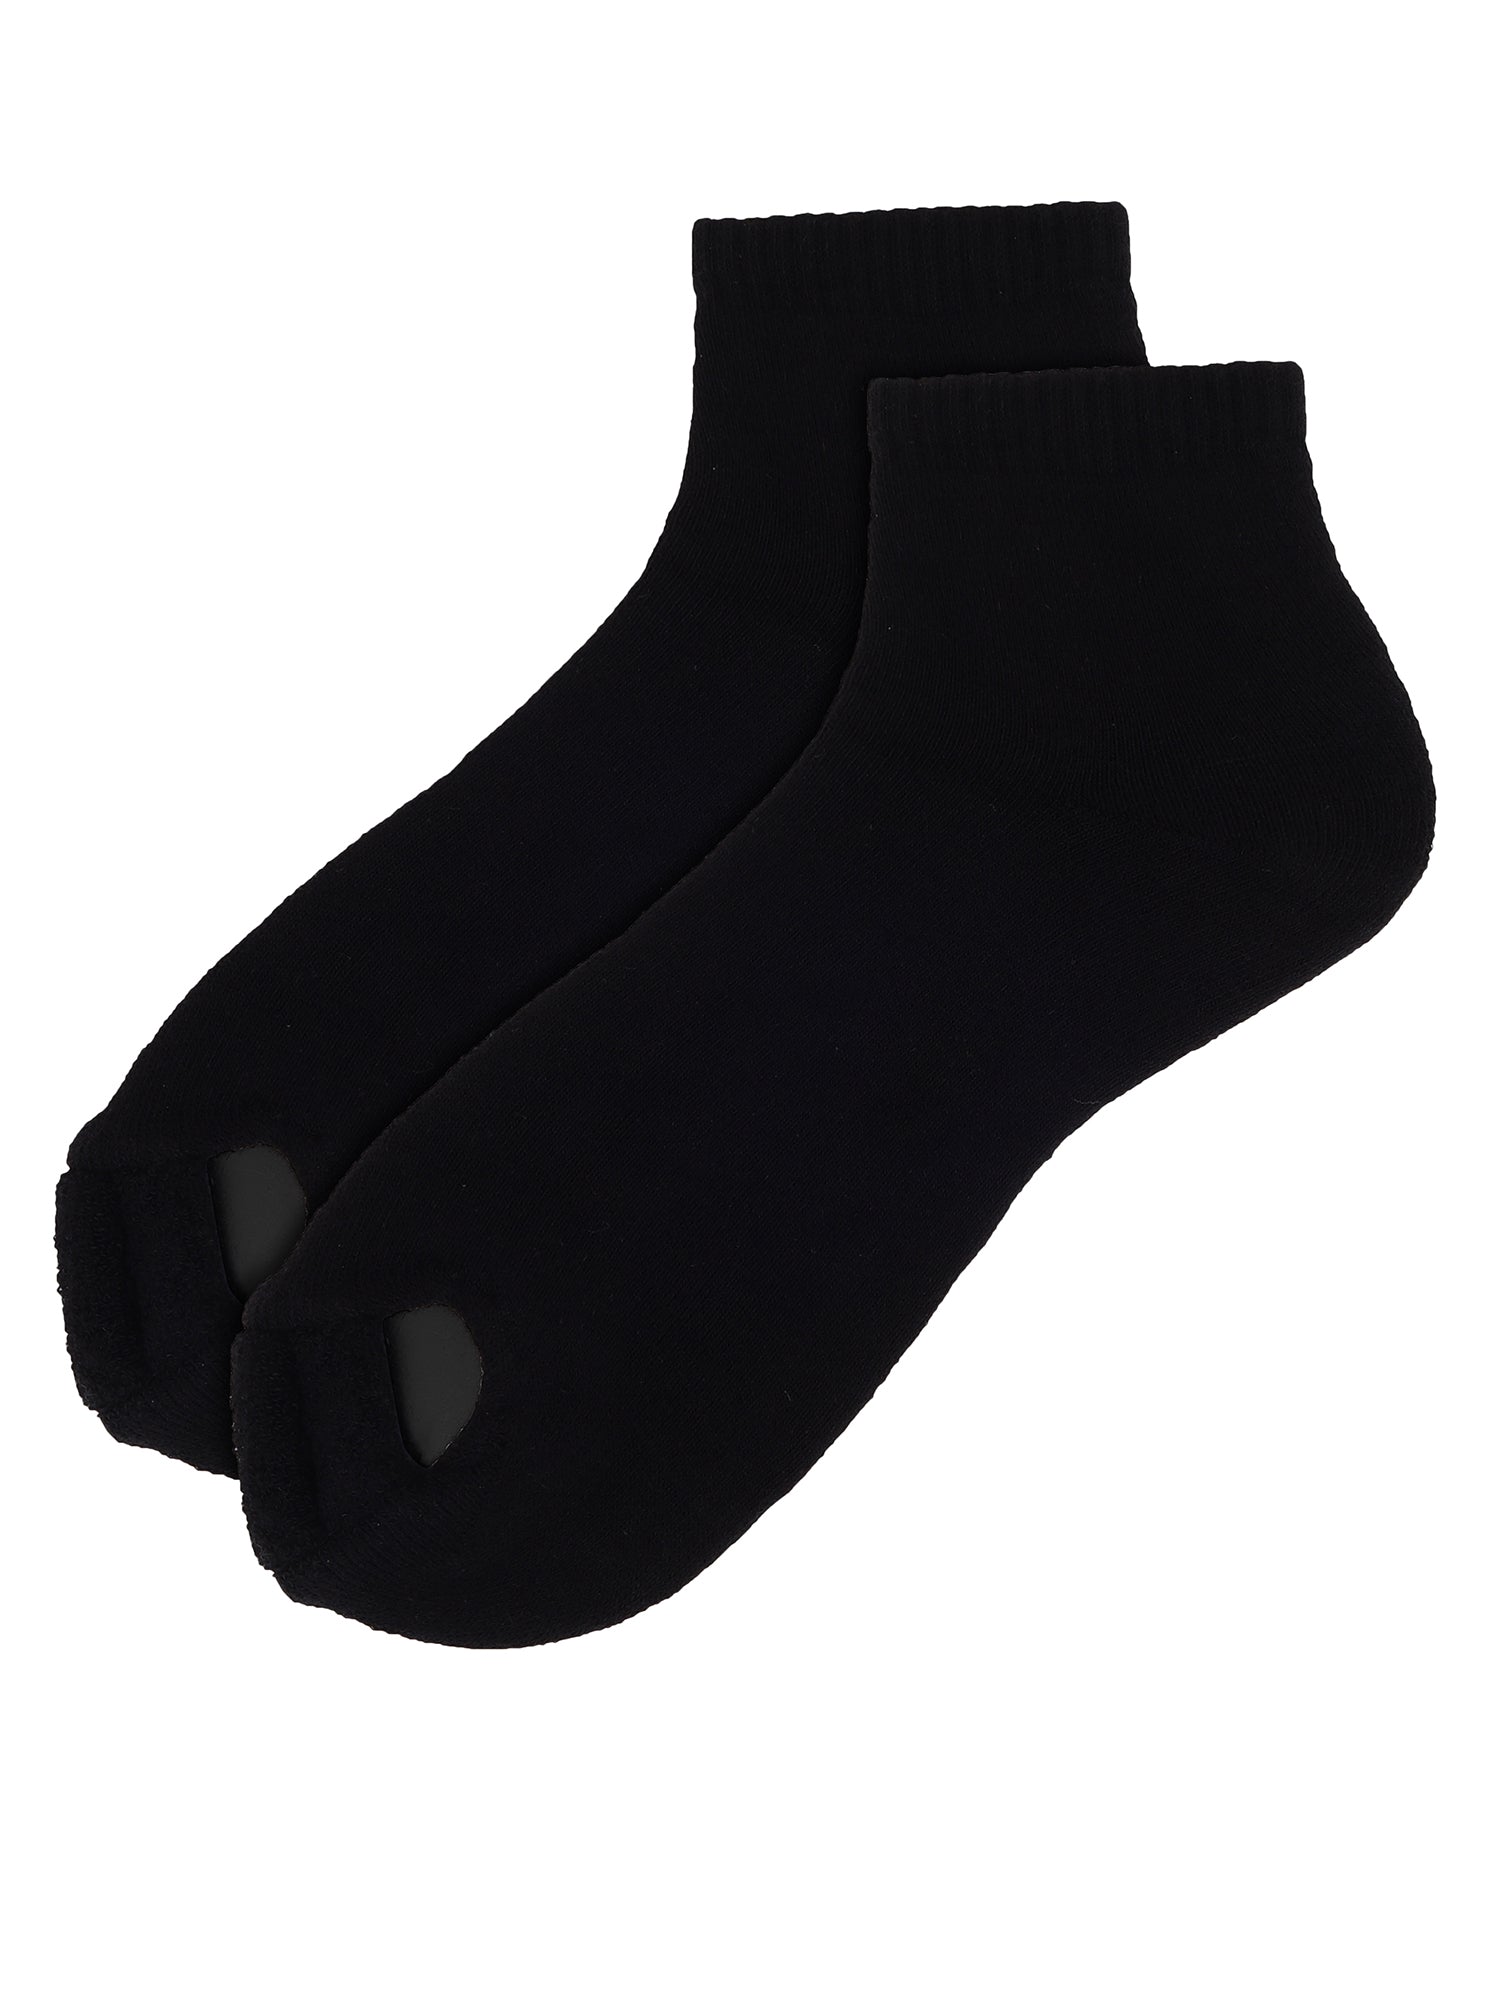 3 easy steps to maximize the benefits of Foot Alignment Socks